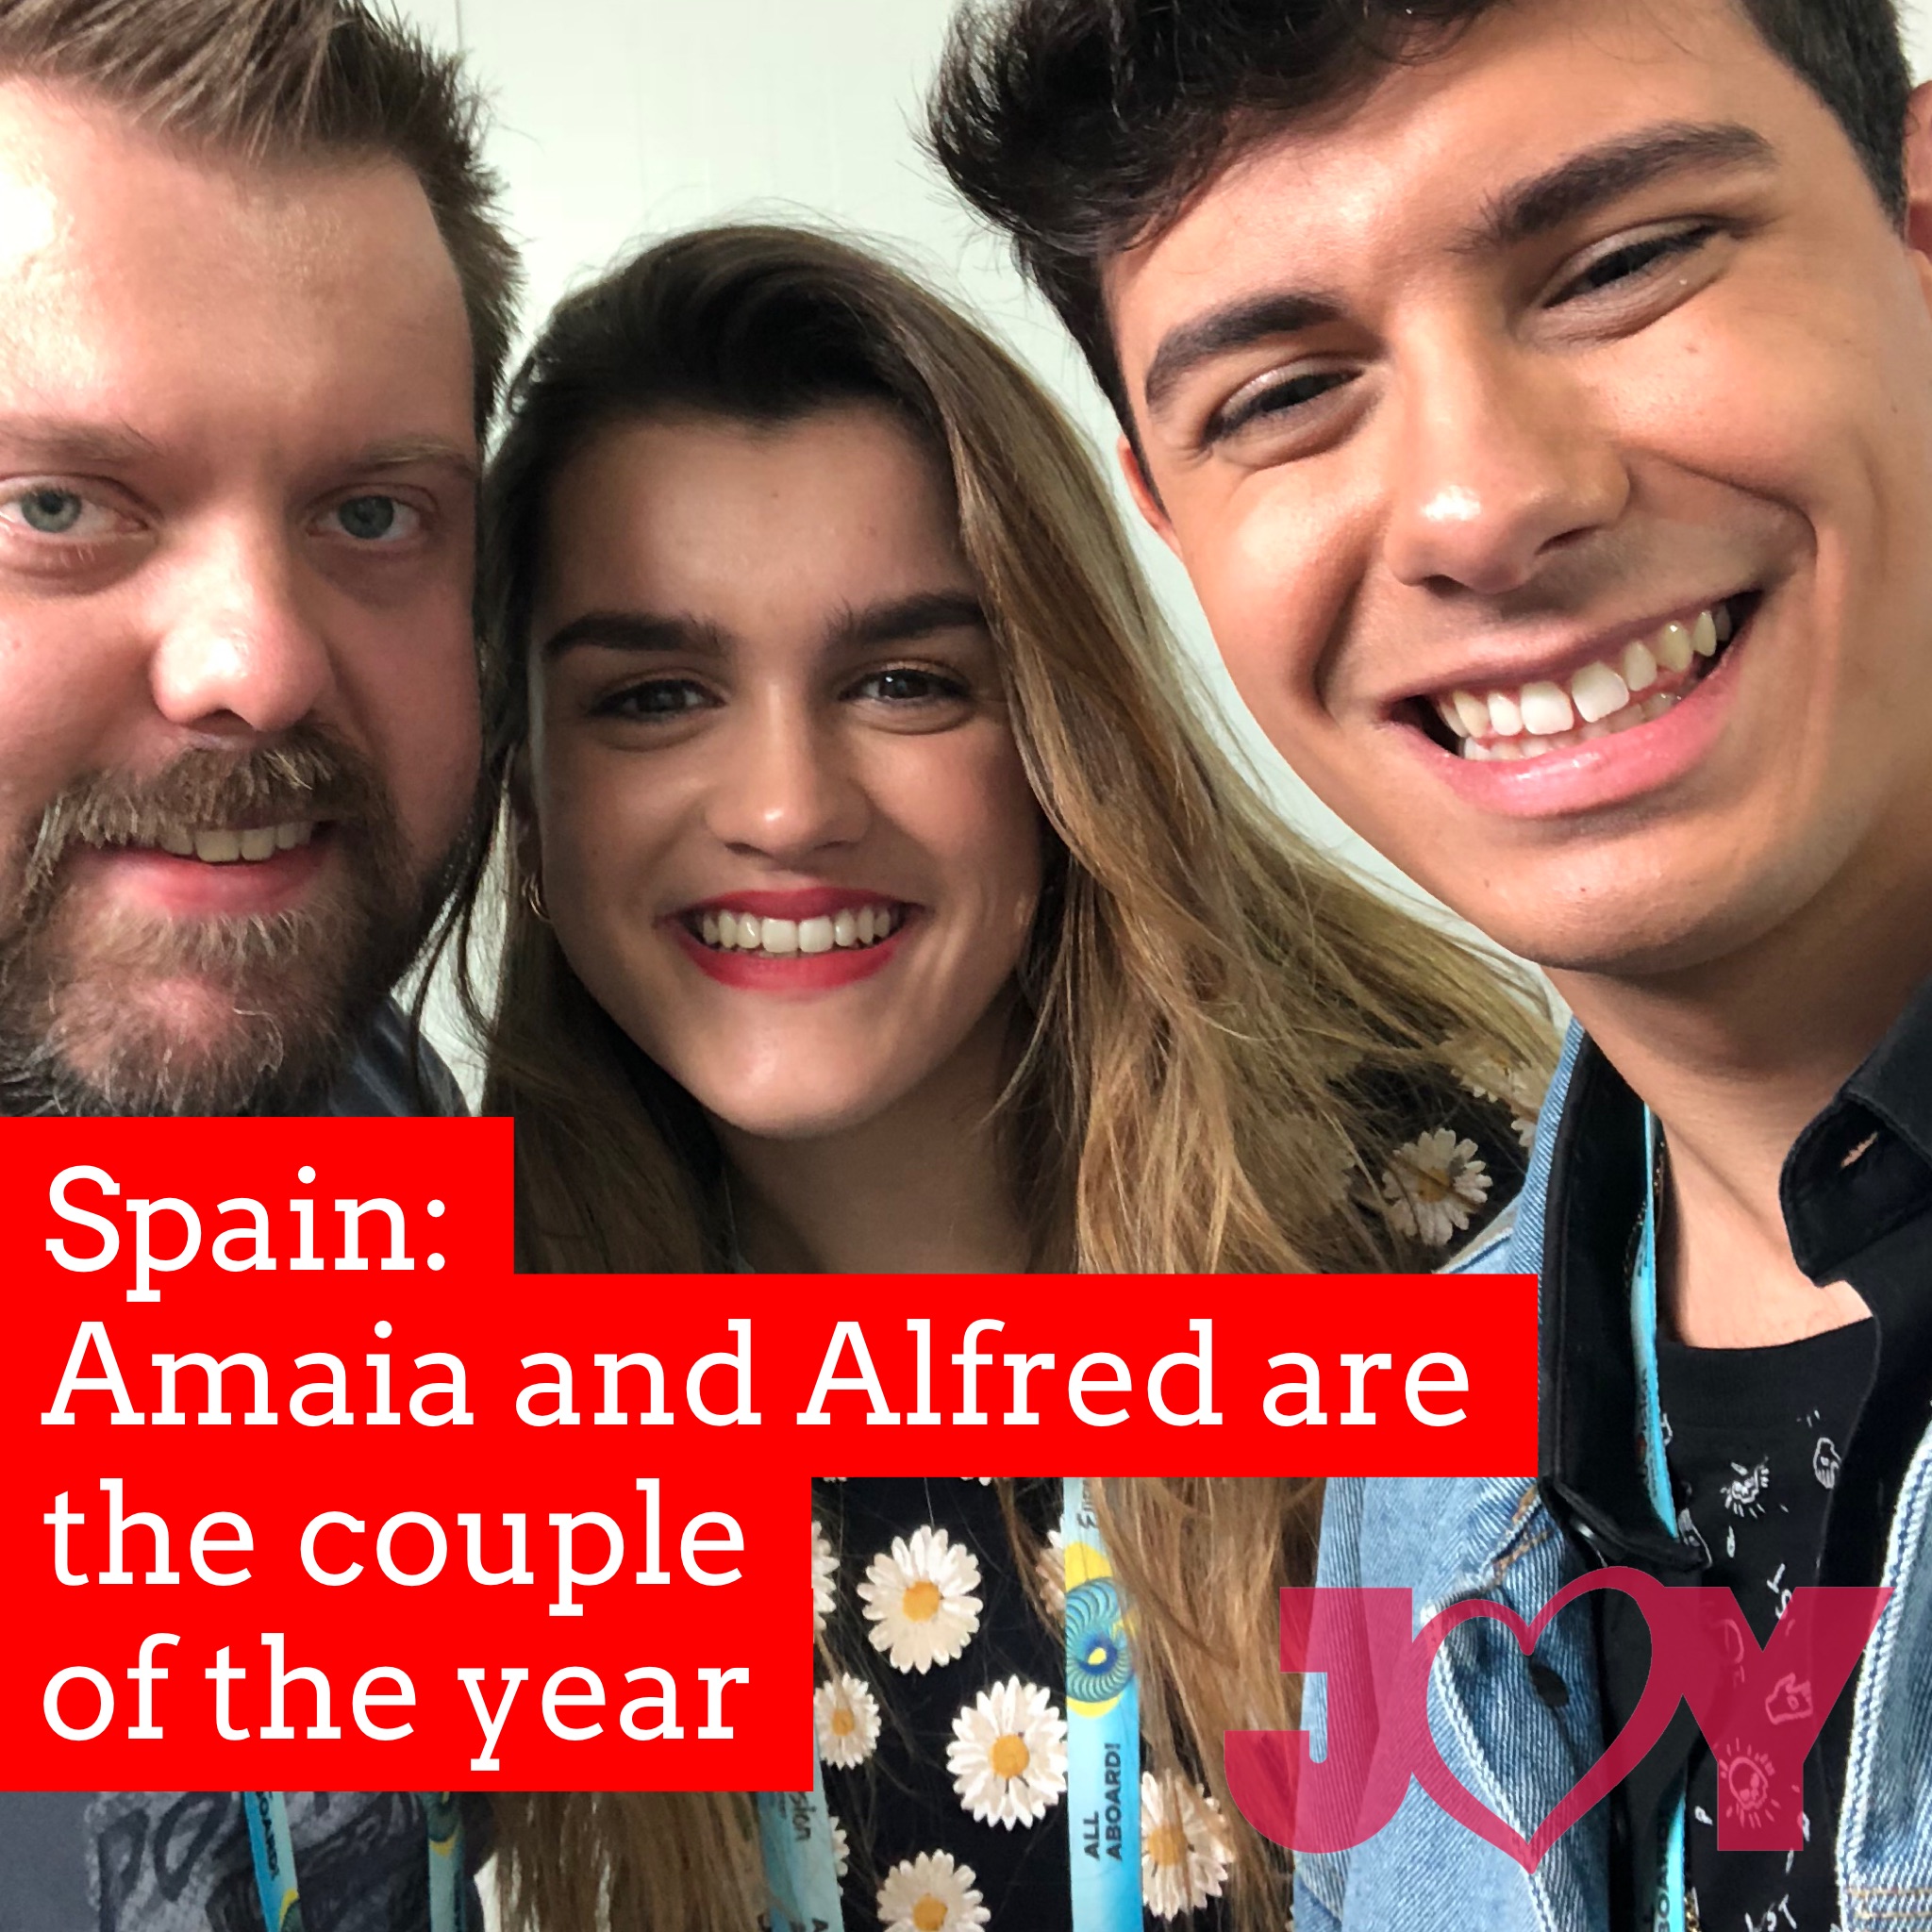 Spain: Amaia and Alfred are the couple of the year